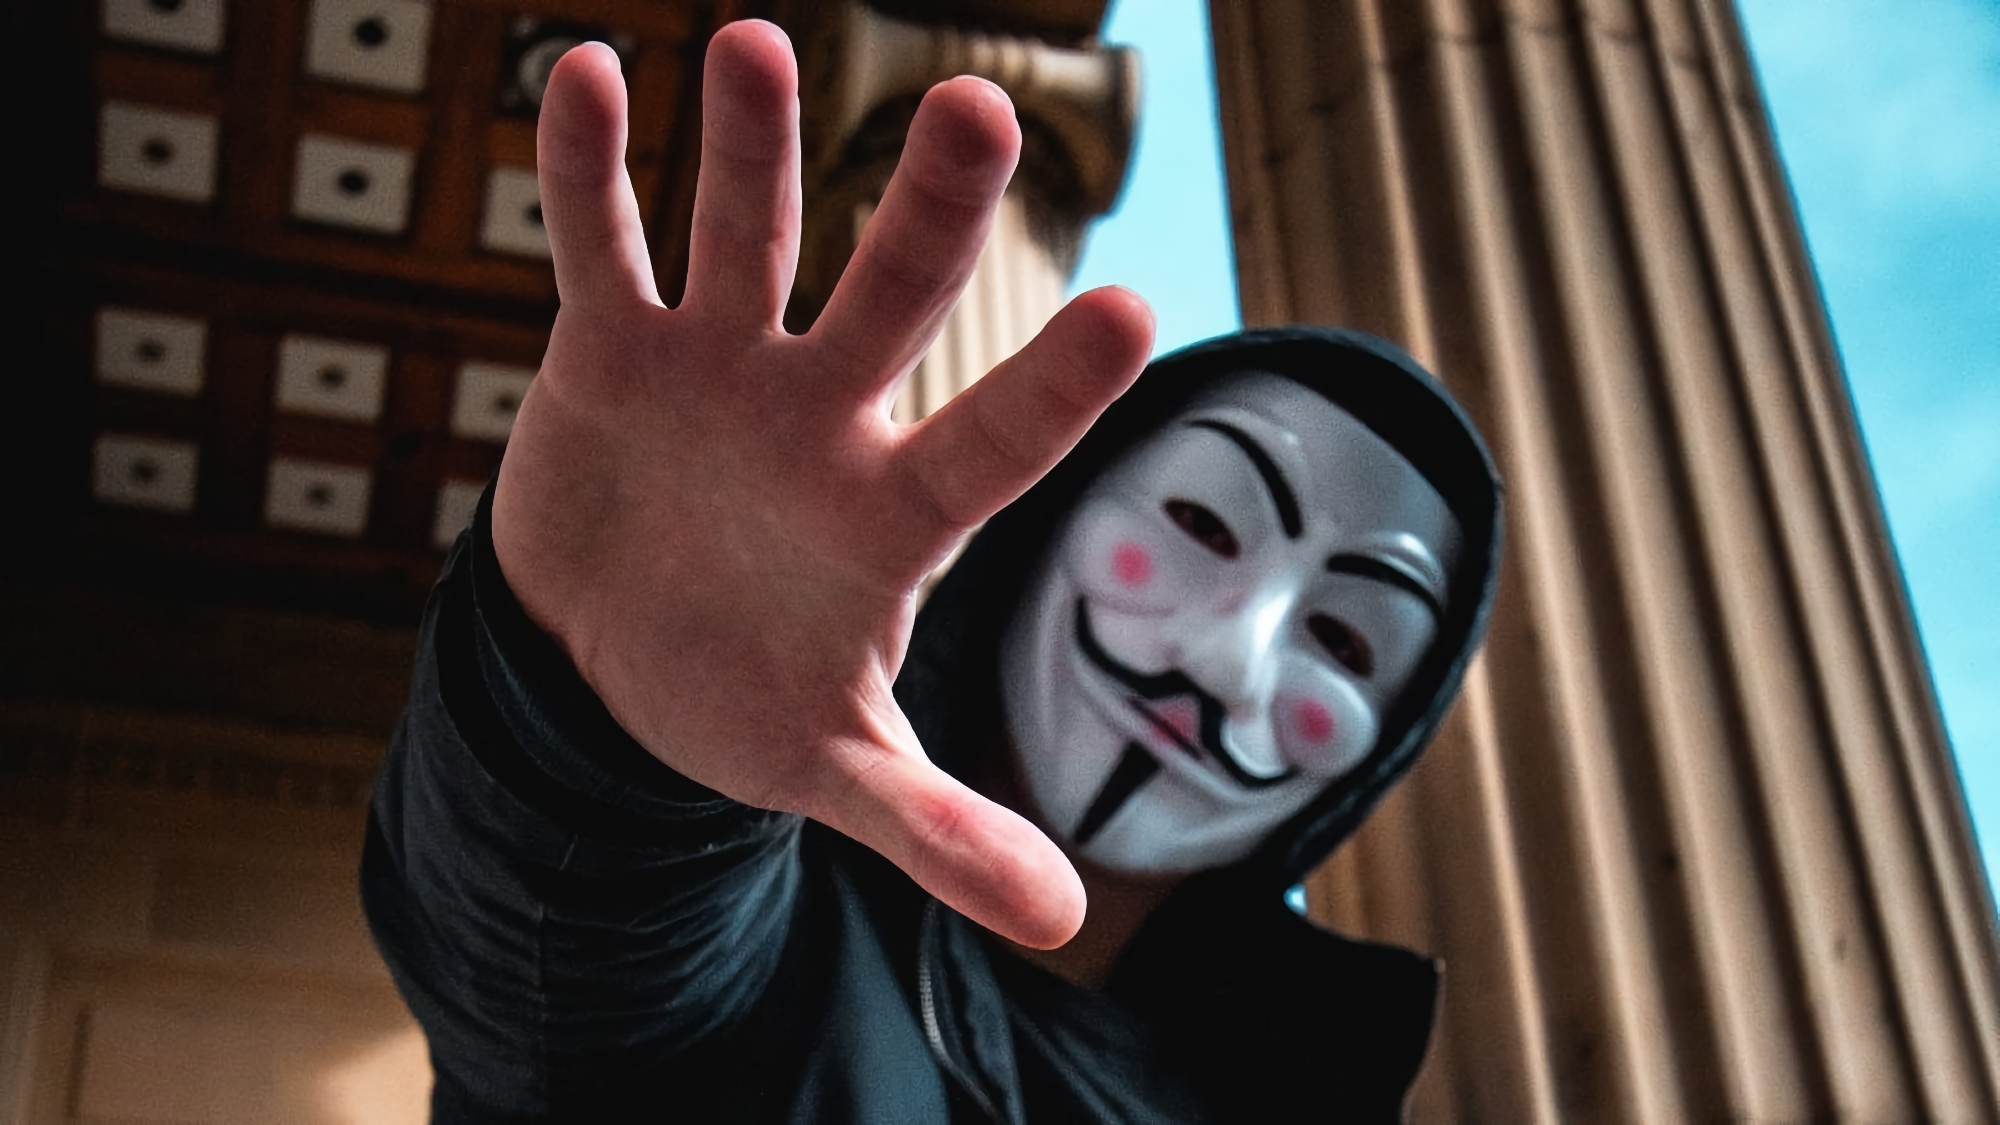 Anonymous was hacked by a company that is engaged in geo-prospecting for Gazprom